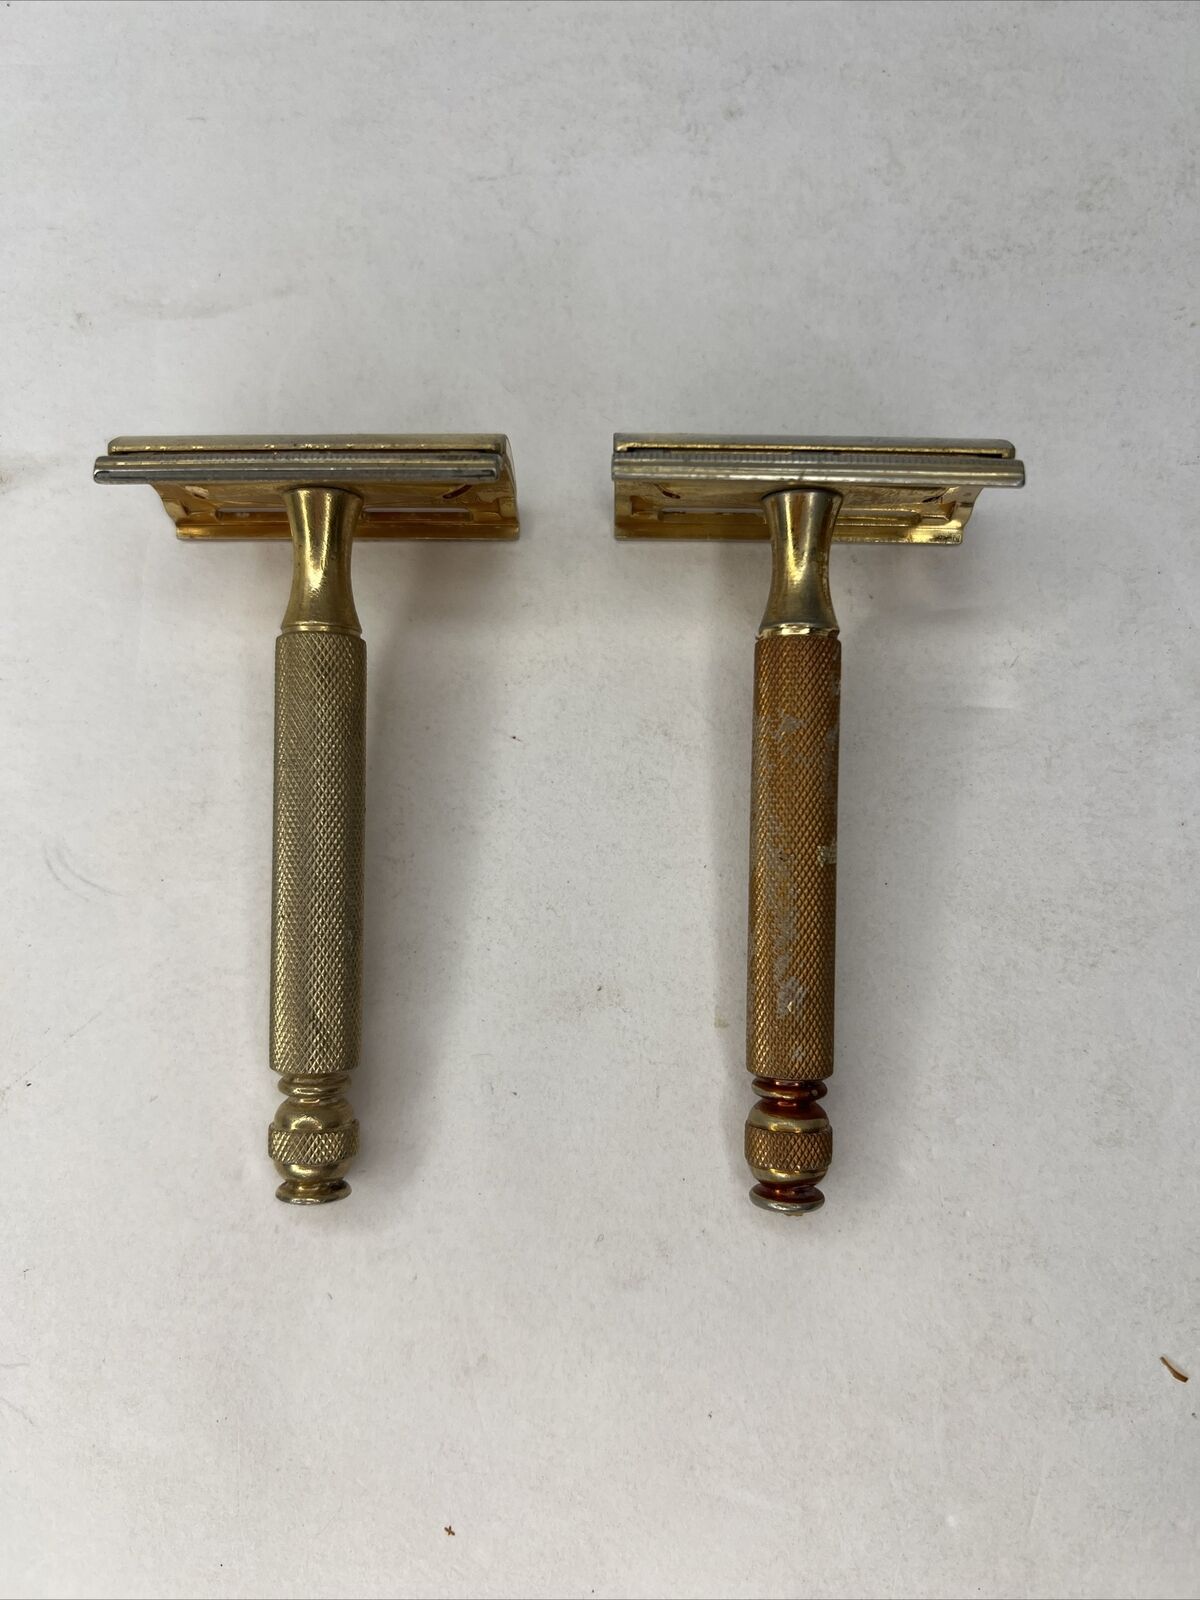 Lot of TWO: Vintage Gillette Safety Razors - Brass Double Edge Razors